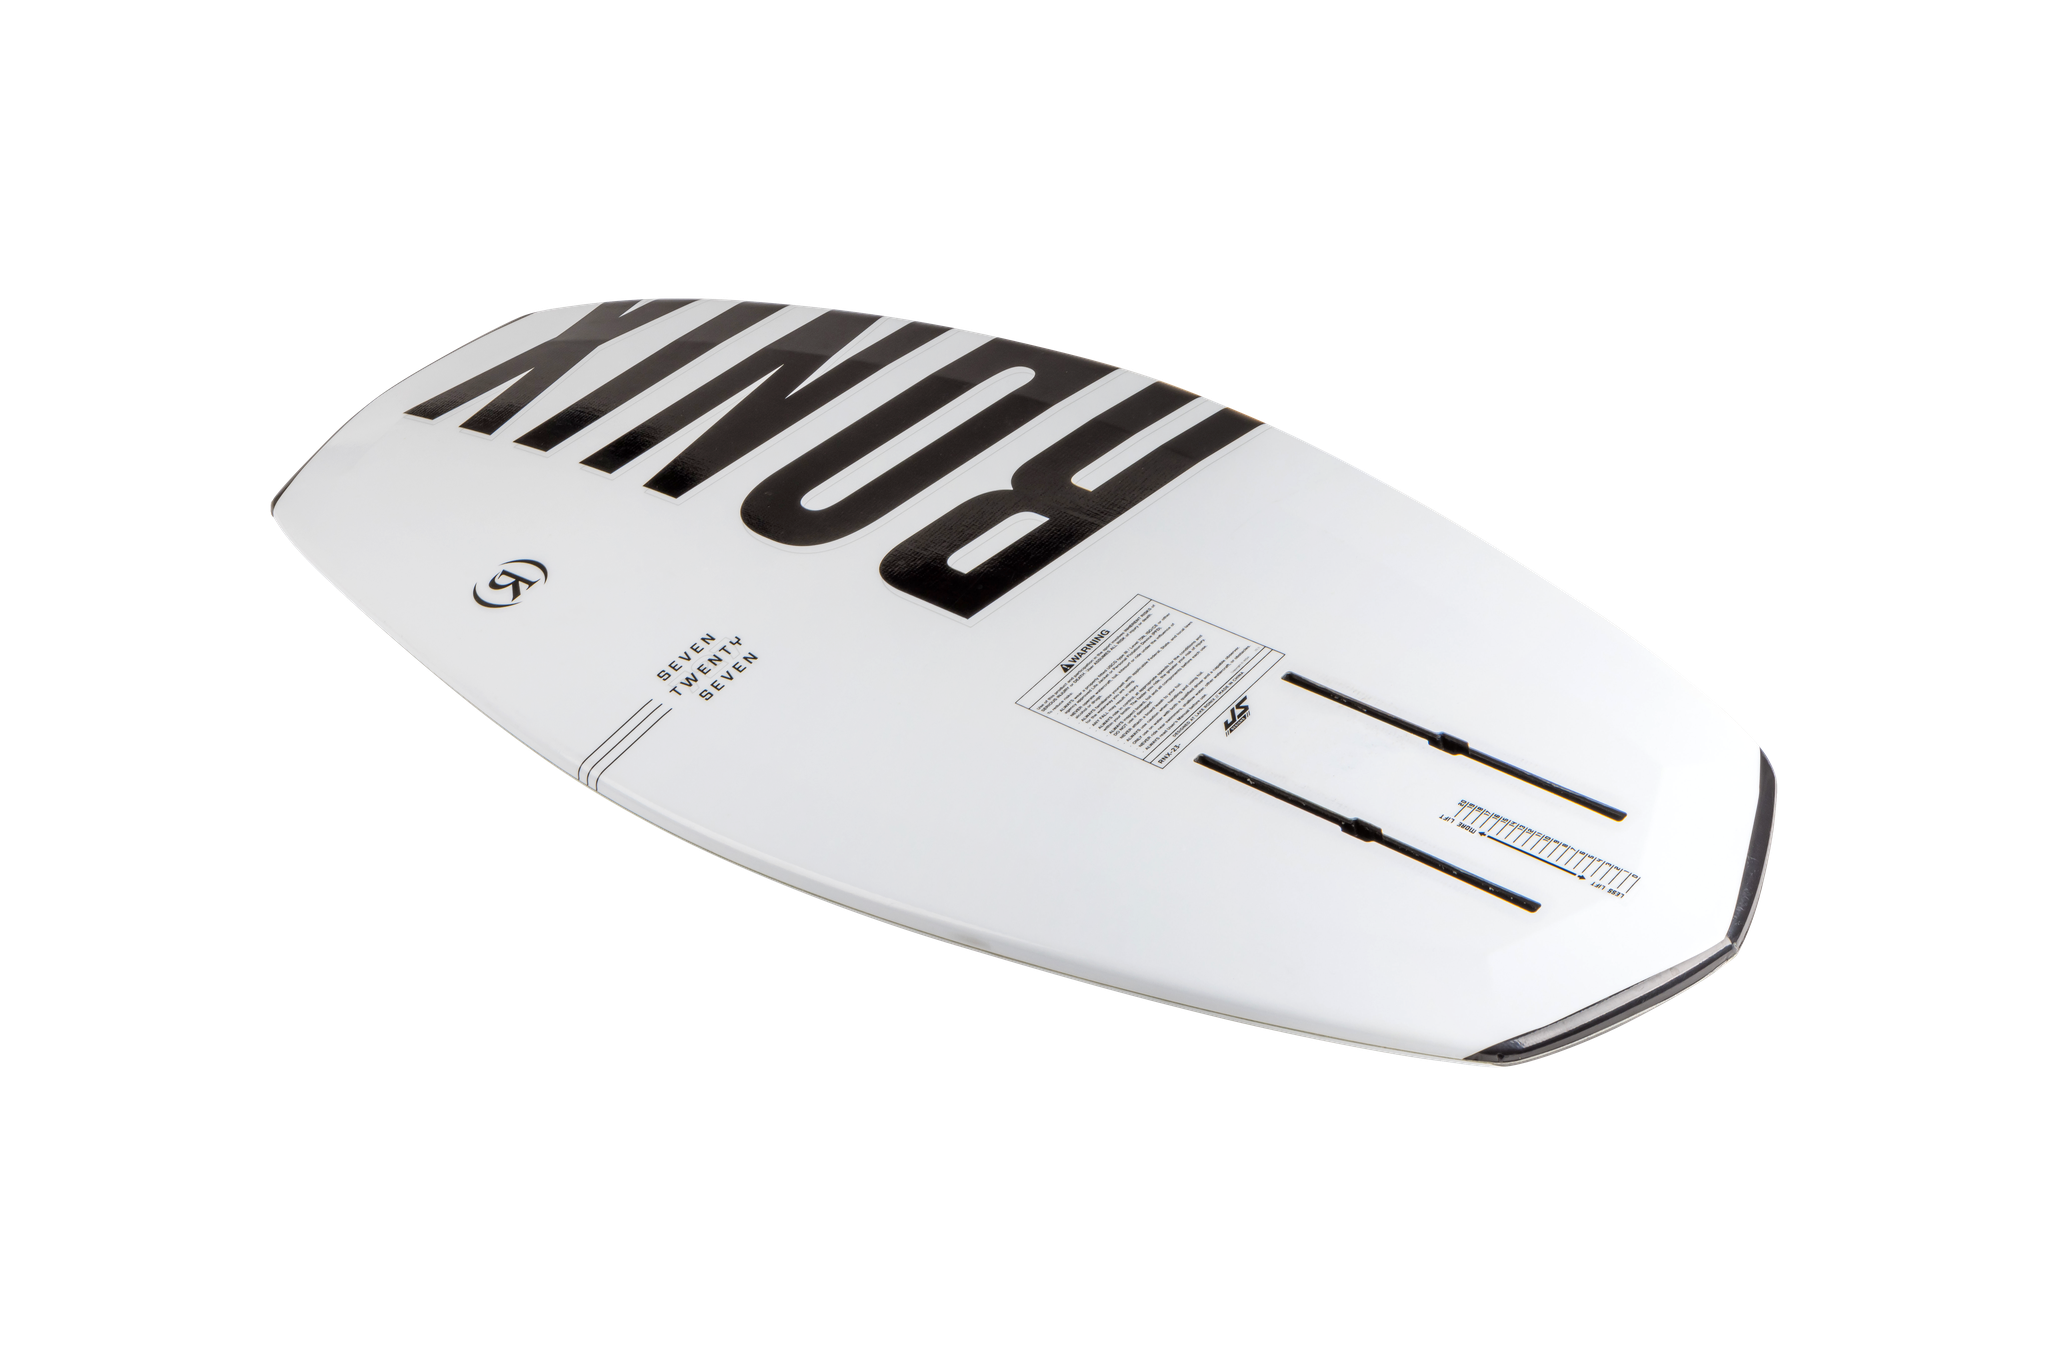 A Ronix Koal Surface 727 Foil | Beginner-Intermediate Hybrid Series board with the word bonx on it, featuring a telescoping adjustable mast for foiling.